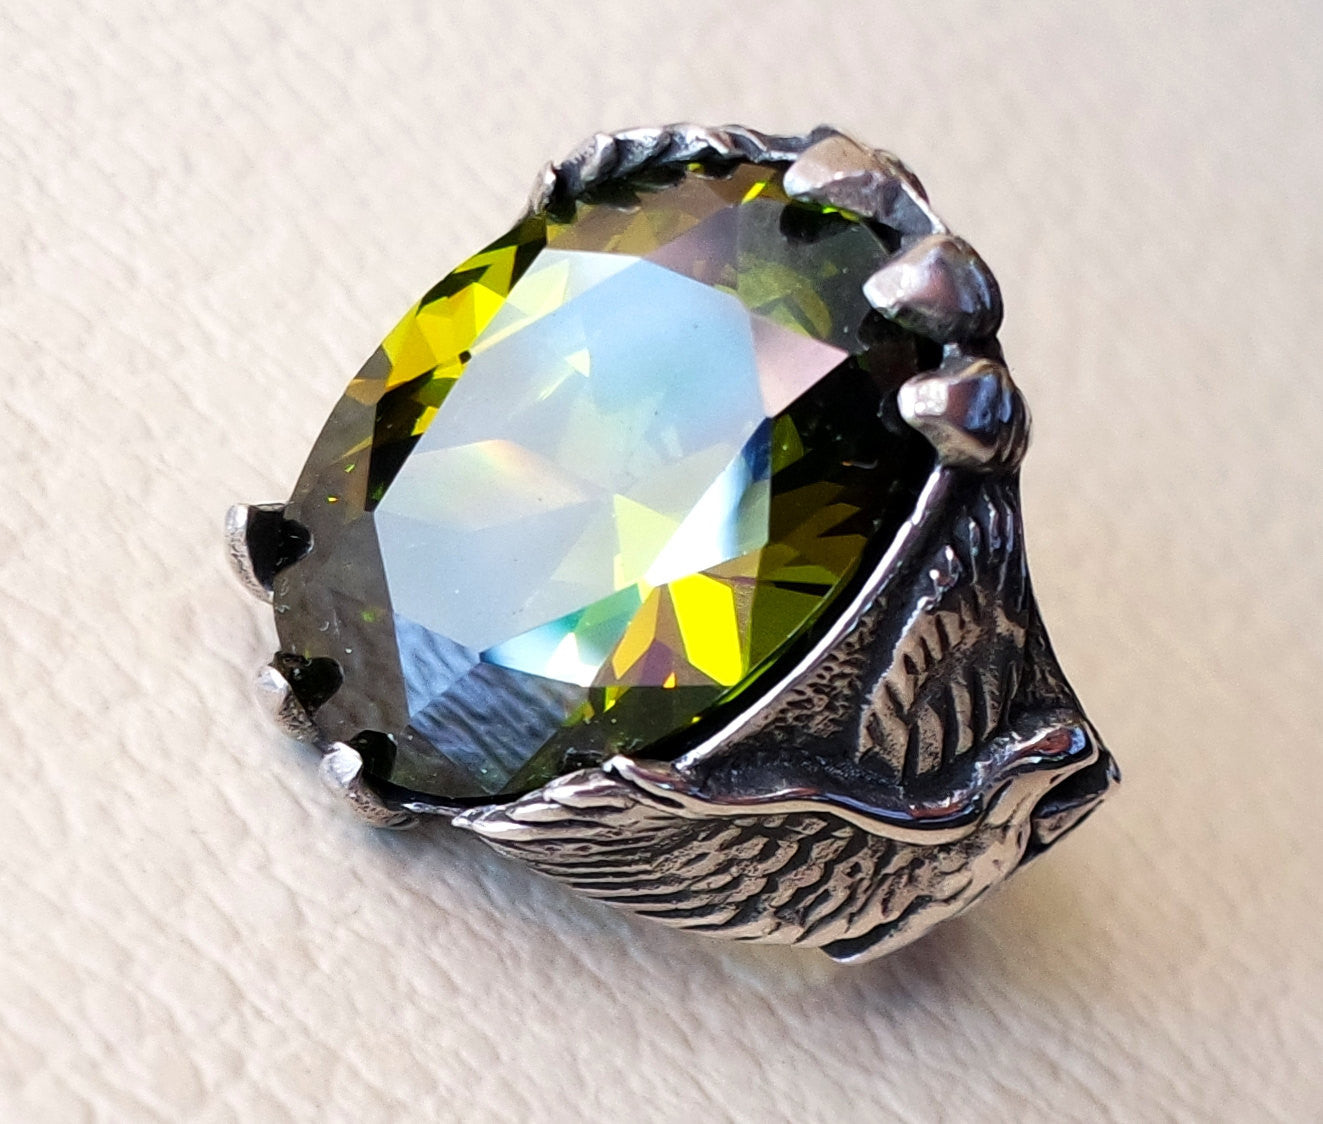 eagle falcon man ring sterling silver 925 oval vivid olive green cubic zircon stone all sizes jewelry gem identical to genuine high quality